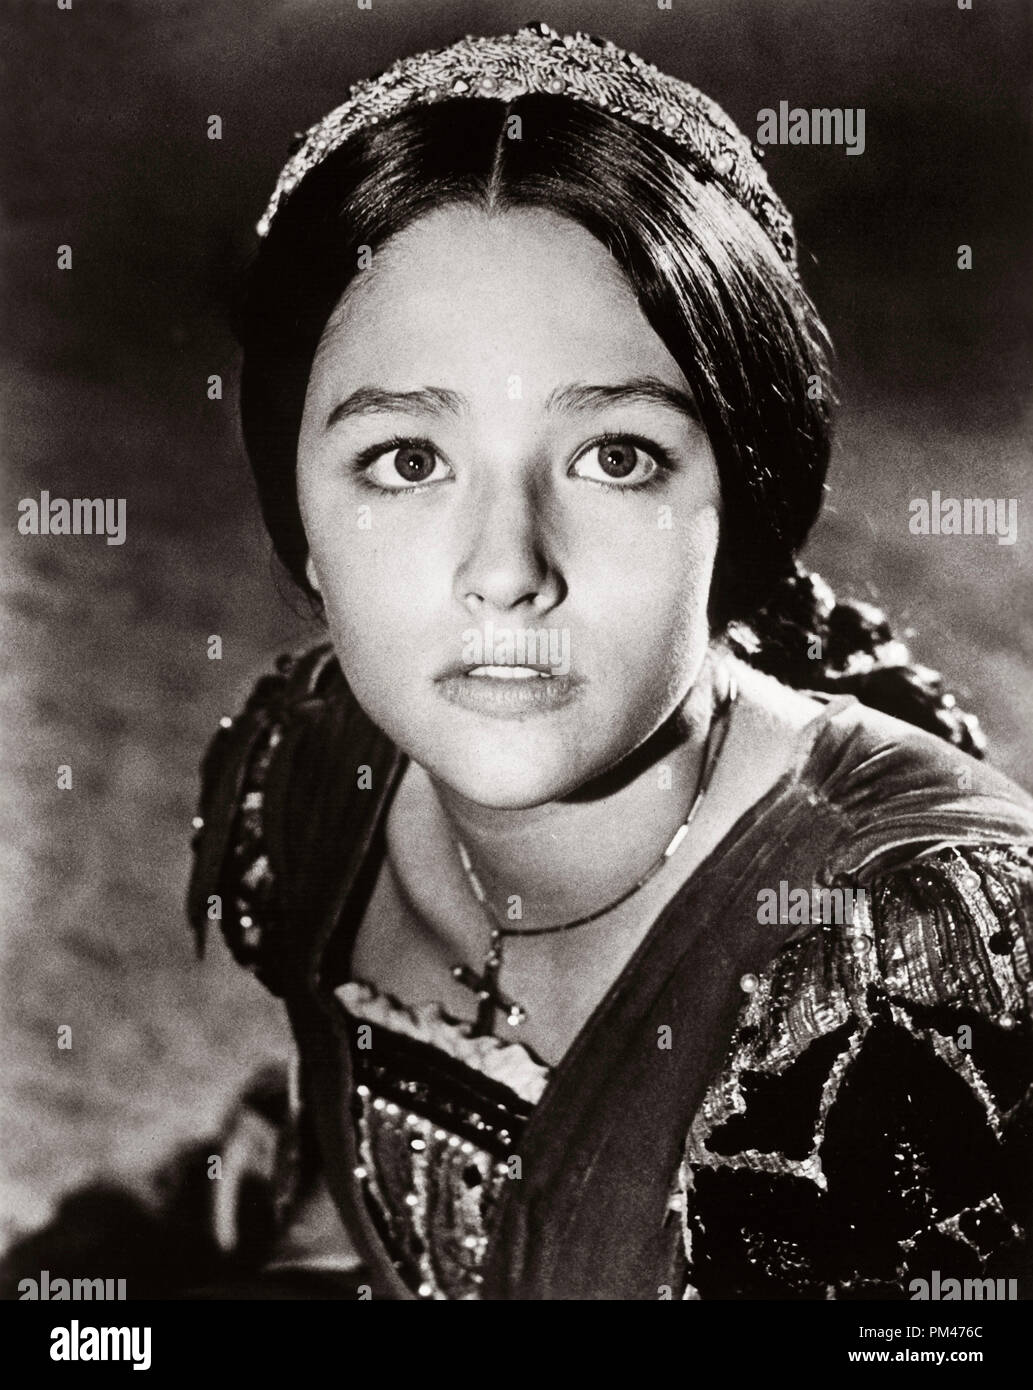 Olivia Hussey in "Romeo & Juliet" 1968 Paramount  File Reference # 1106_008THA Stock Photo